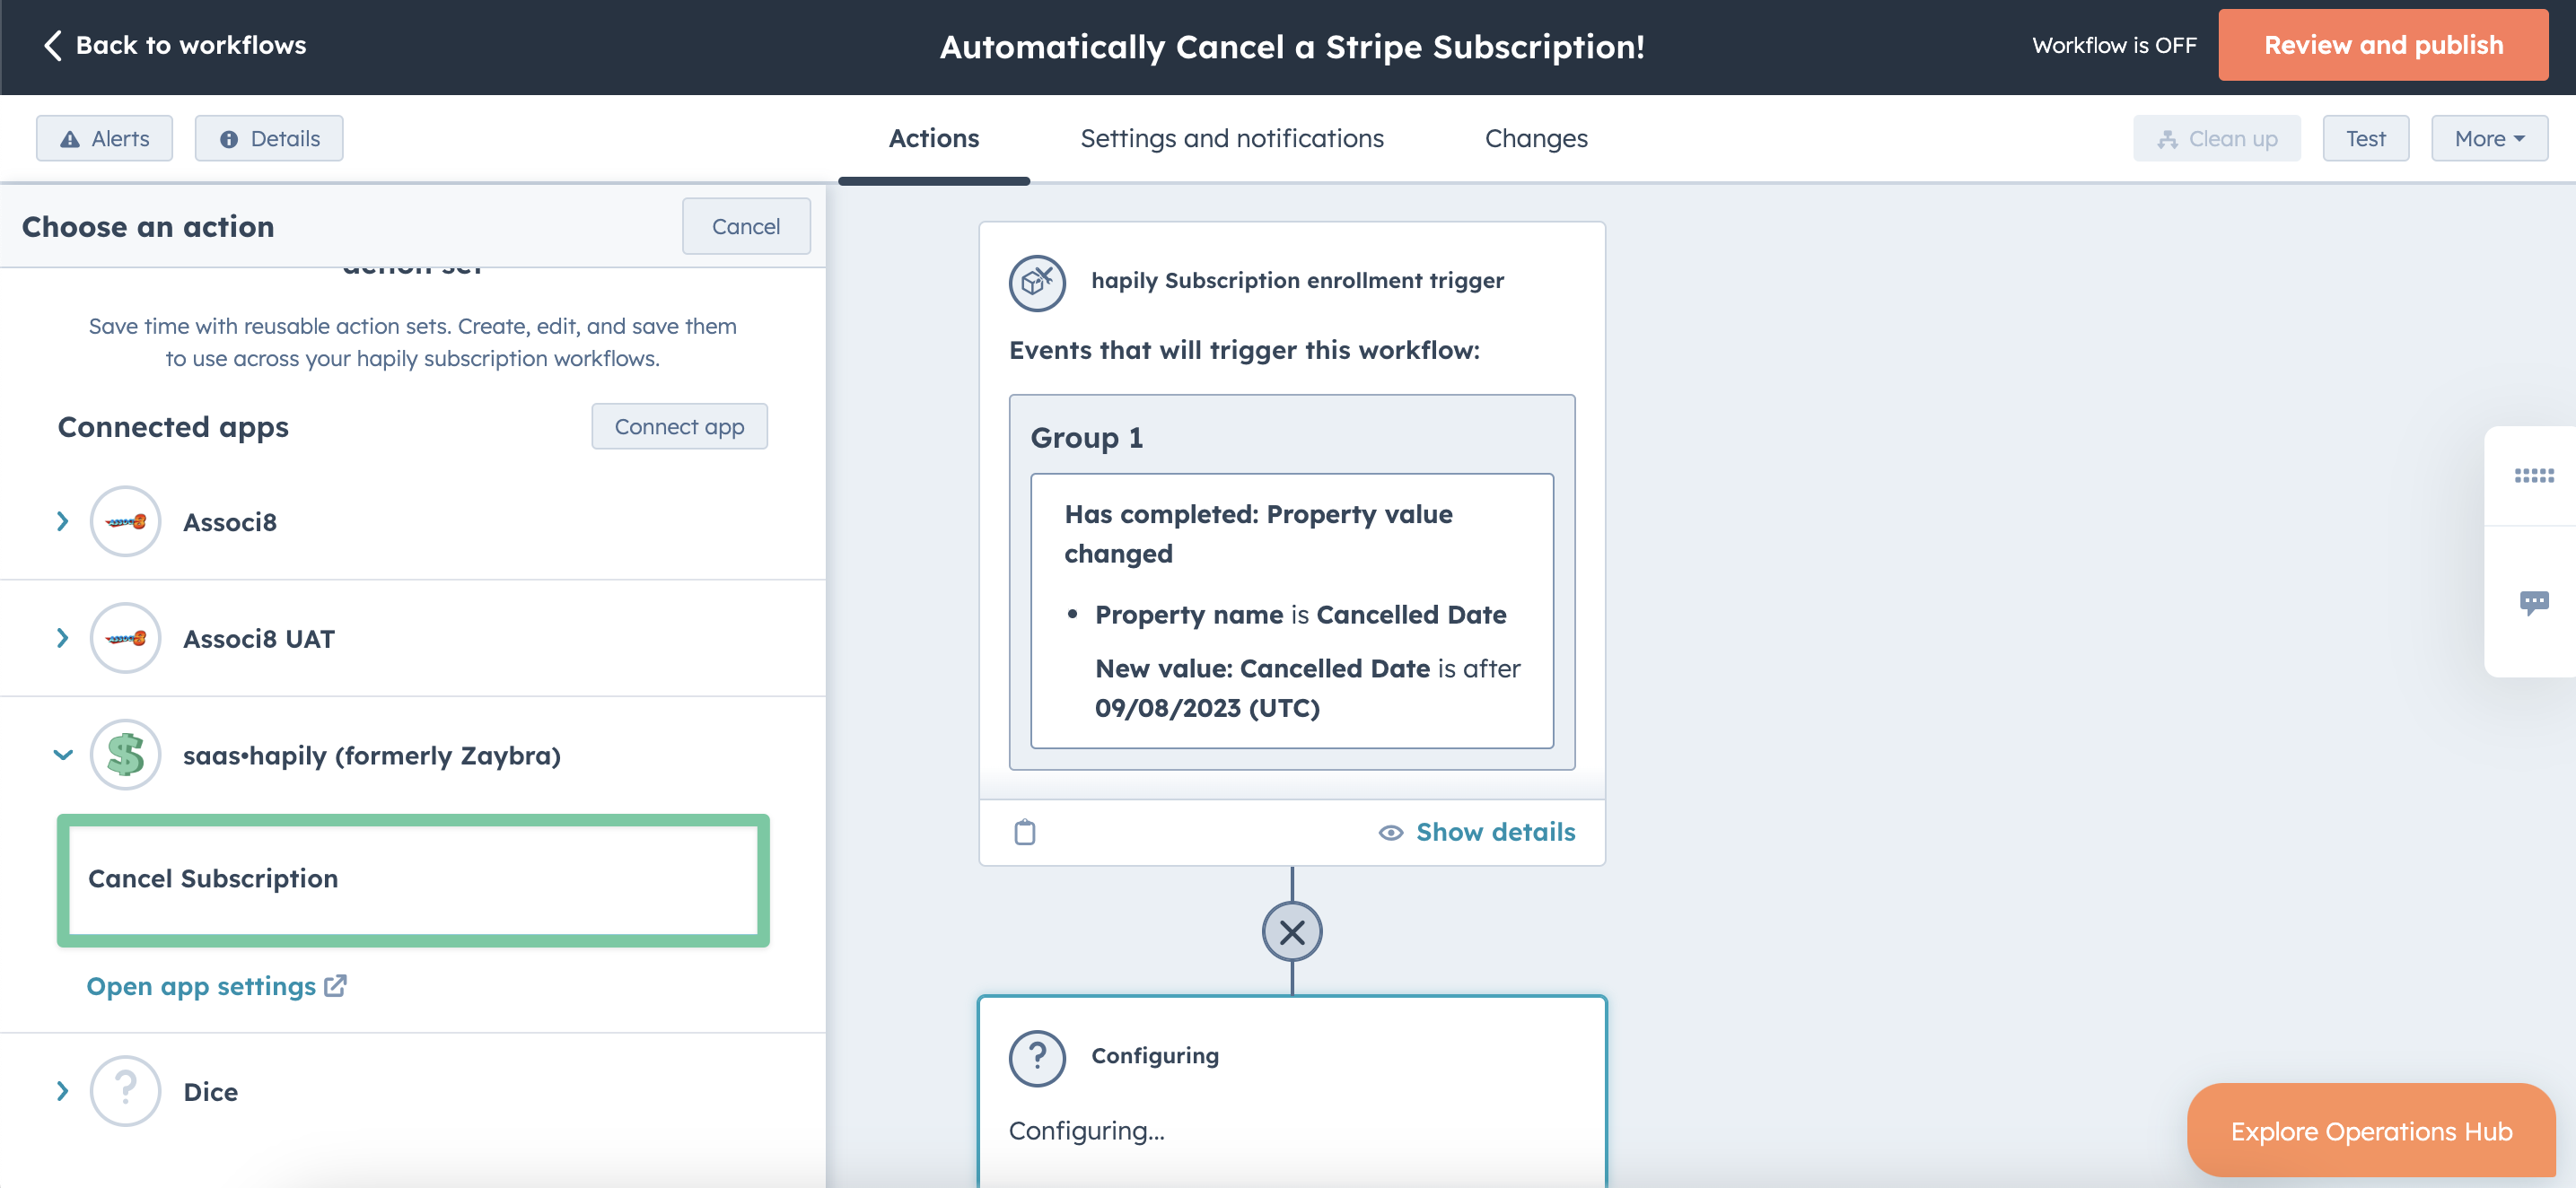 How to automatically cancel a Stripe subscription